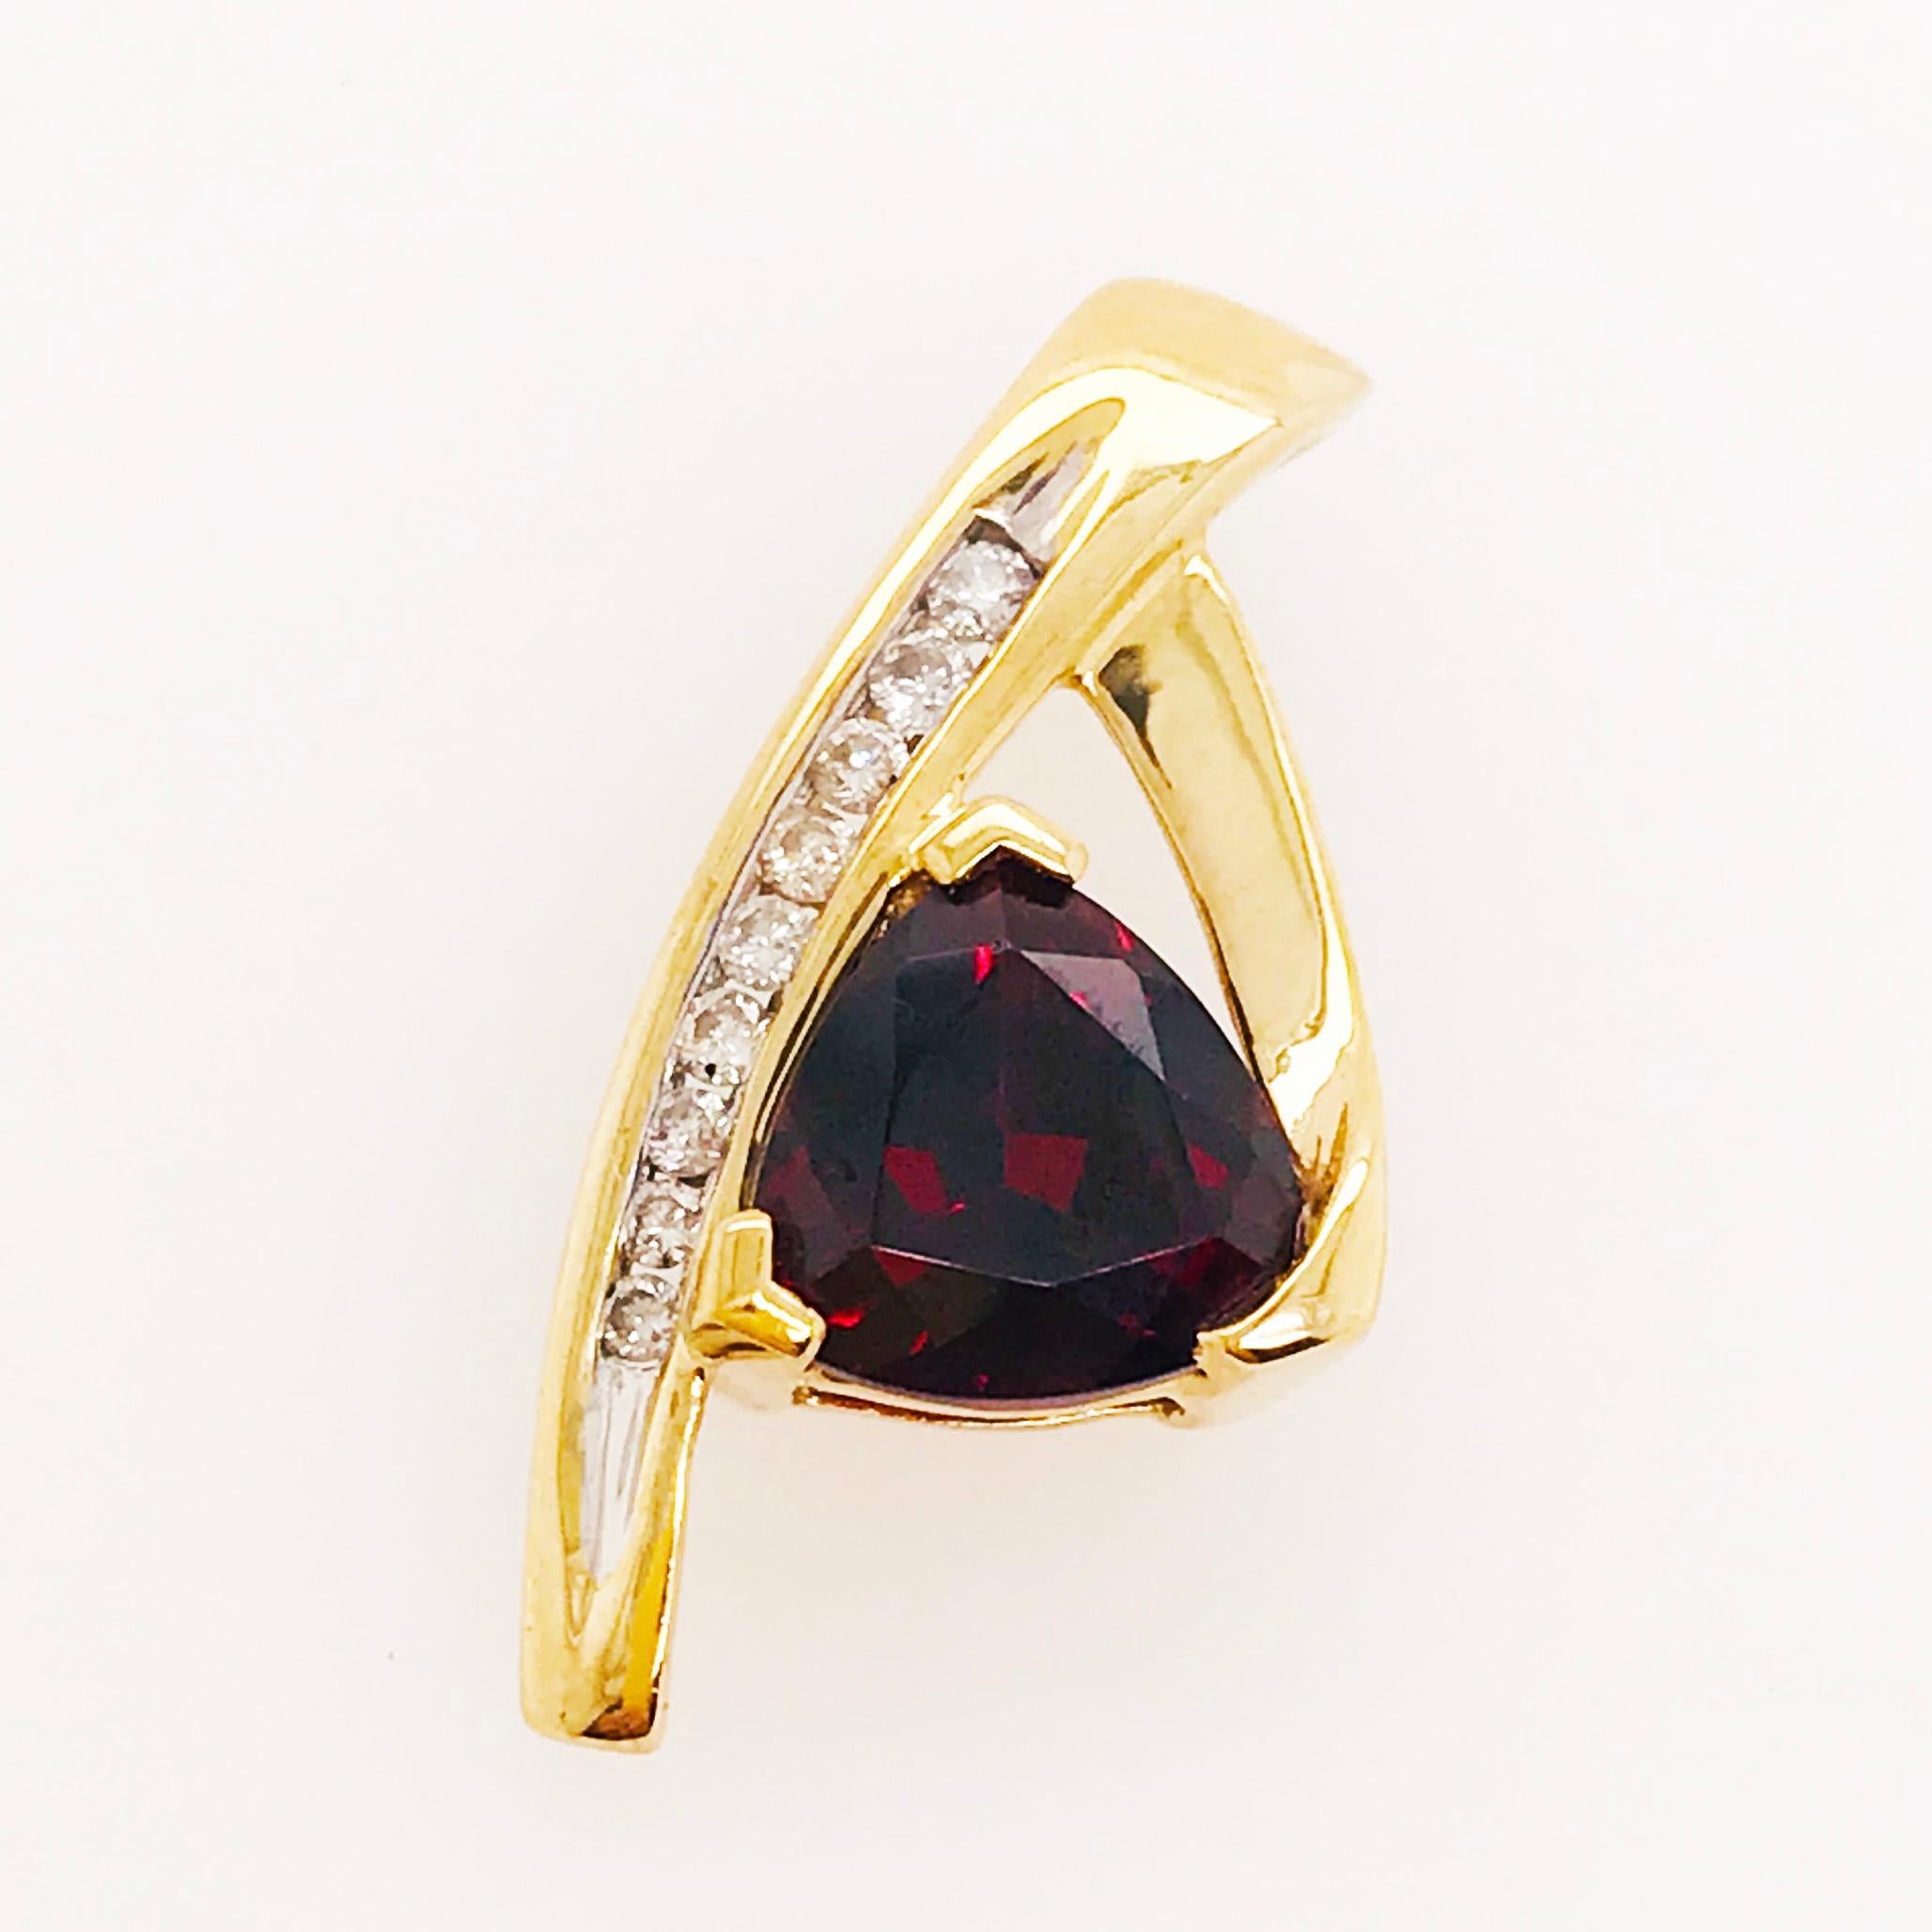 This estate garnet and diamond custom piece is a one of a kind slide pendant. The pendant has a trillion shaped genuine garnet gemstone that has a beautiful bold red color. Framing one side of the garnet gemstone is a diamond row set in white gold.